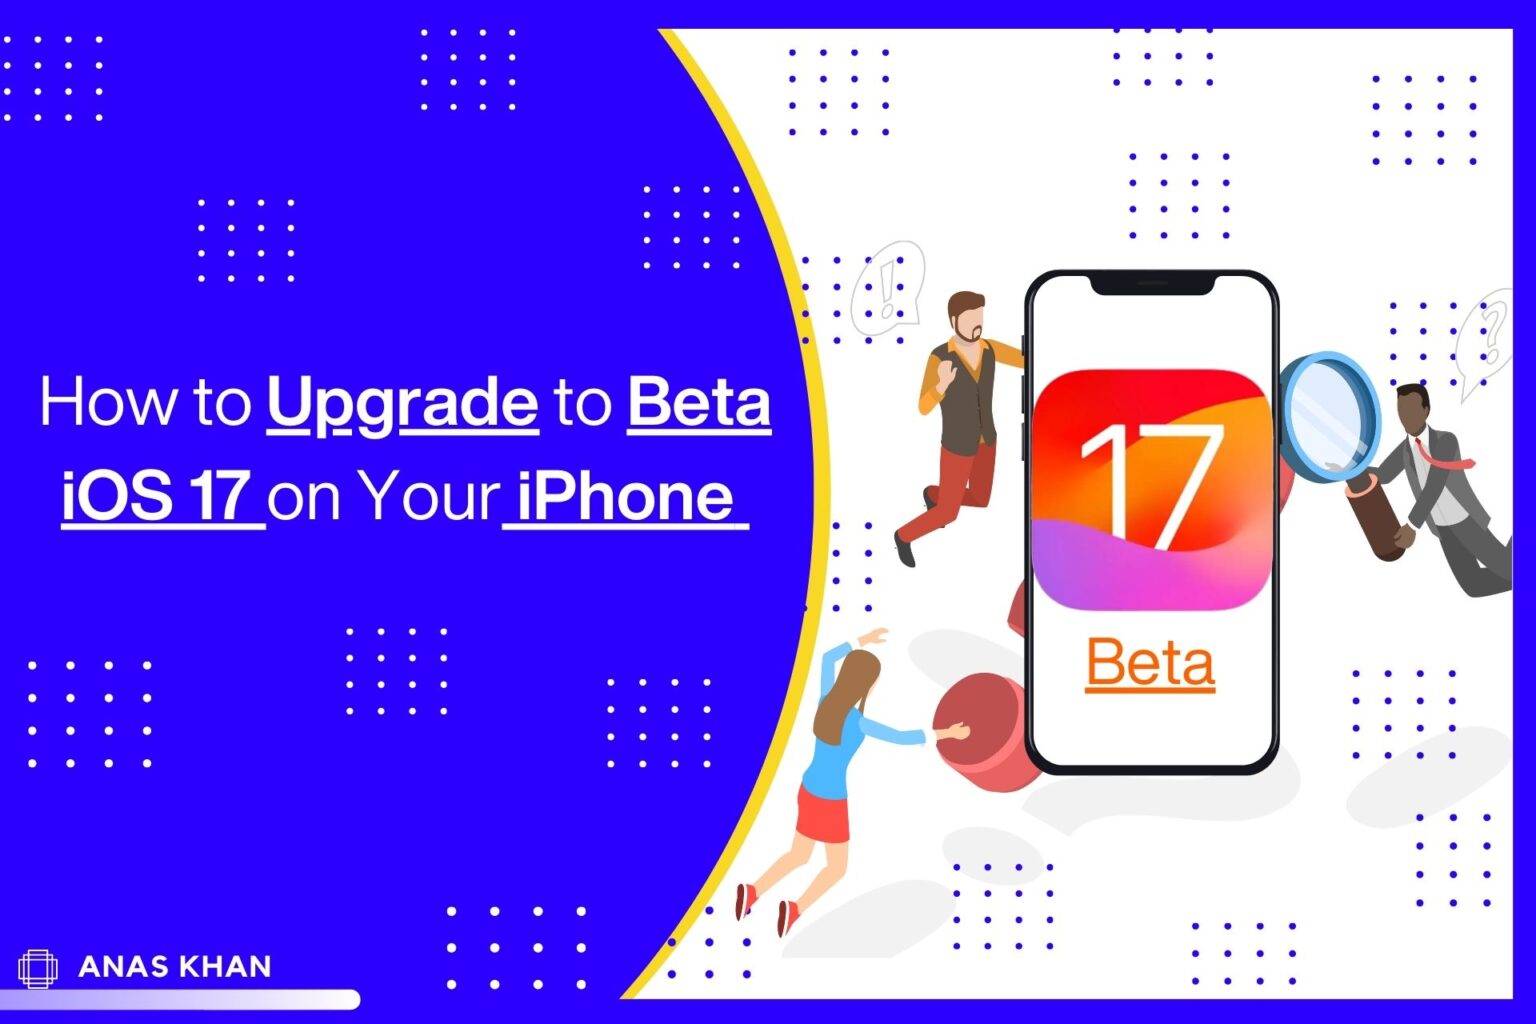 How to Upgrade to Beta iOS 17 on Your iPhone